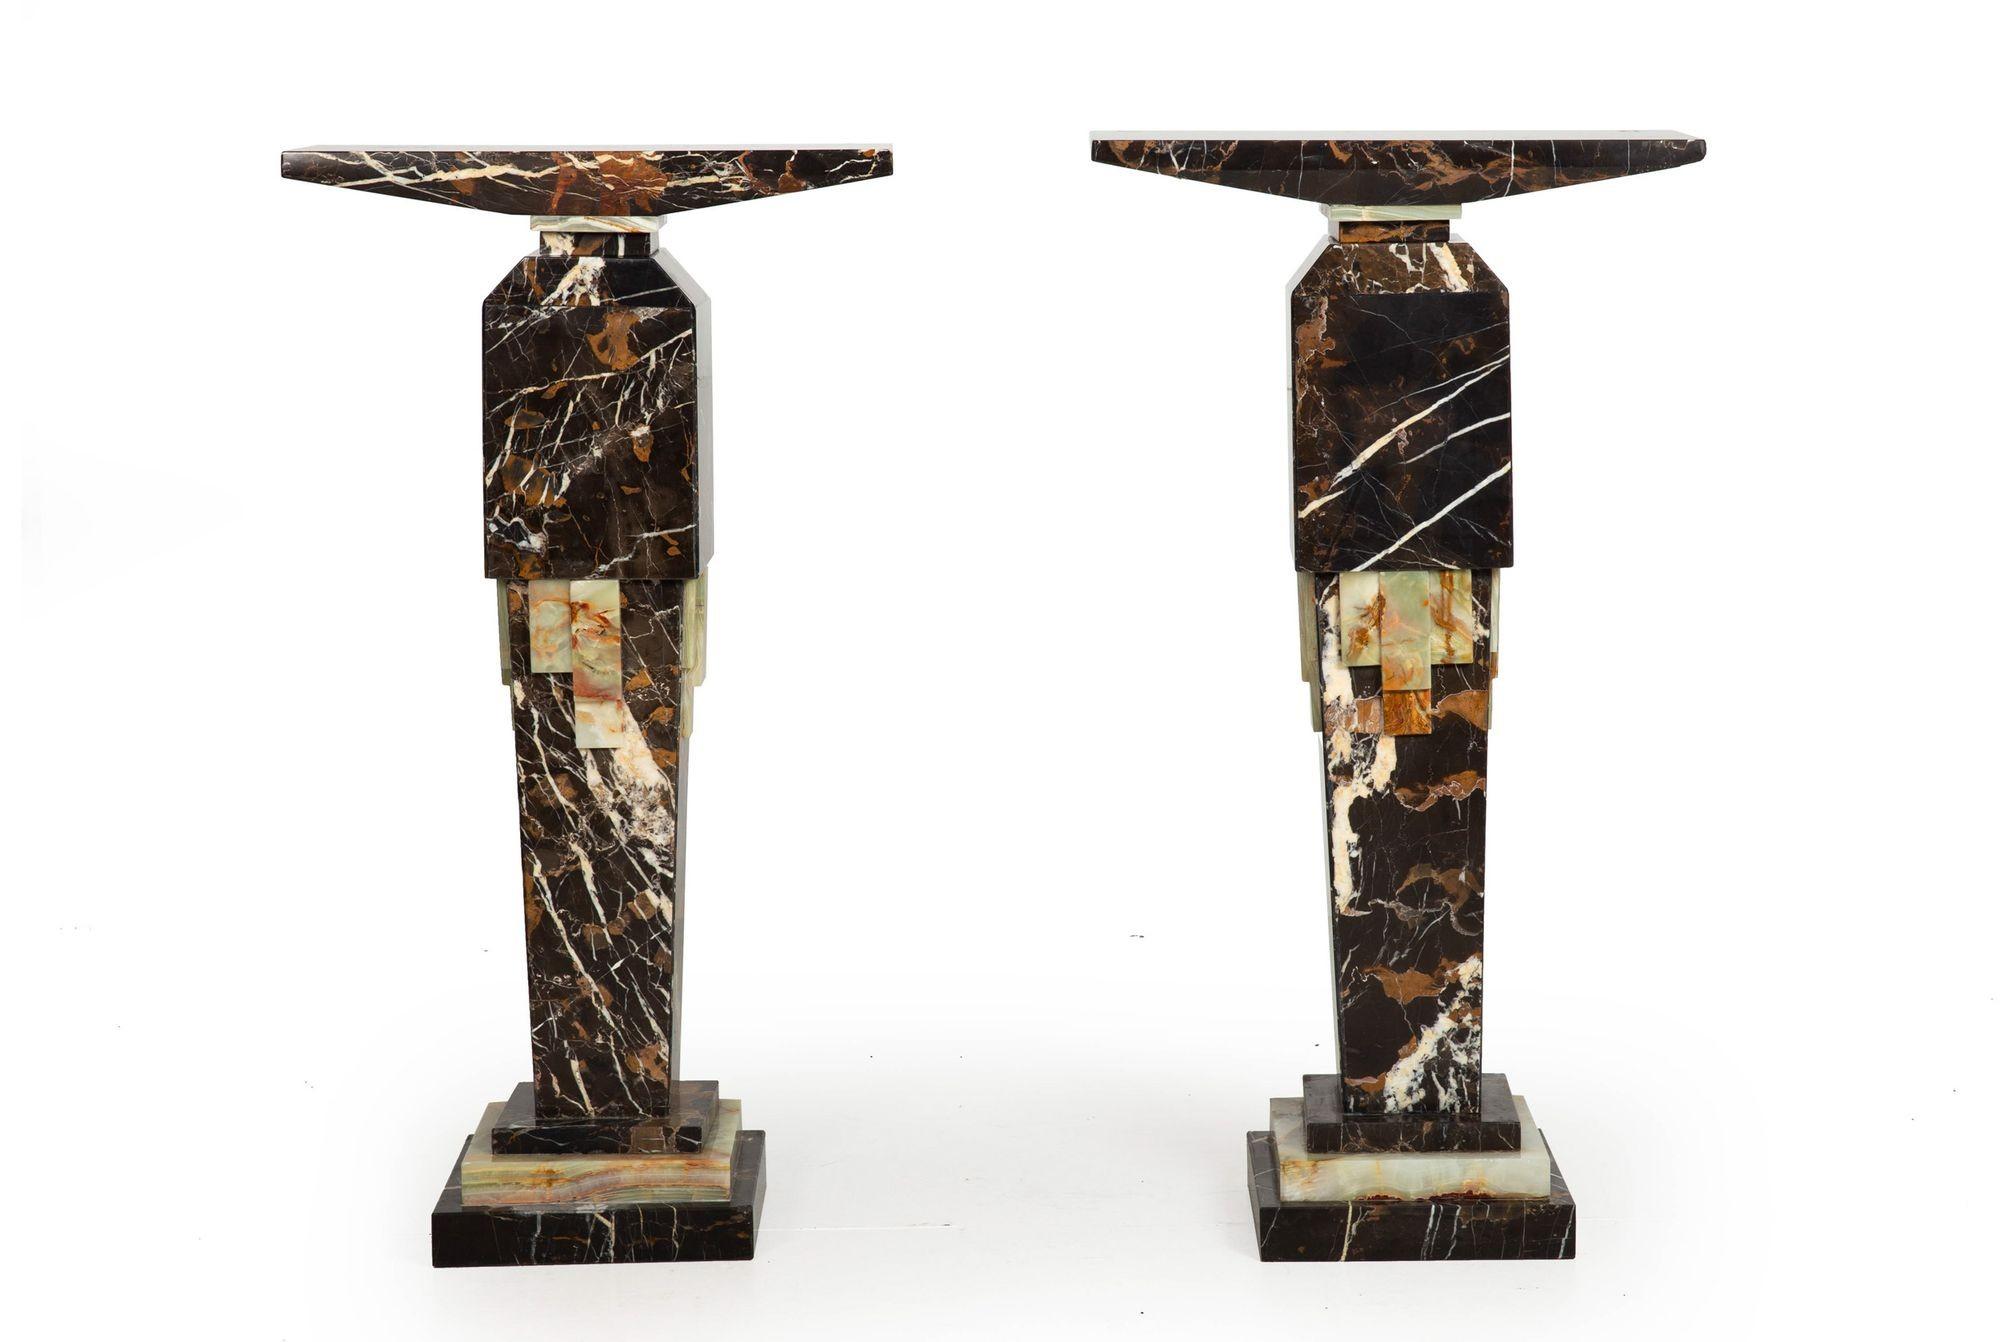 20th Century Pair of Art Deco Style Marble & Onyx Pedestals Columns with Bronze Panels For Sale